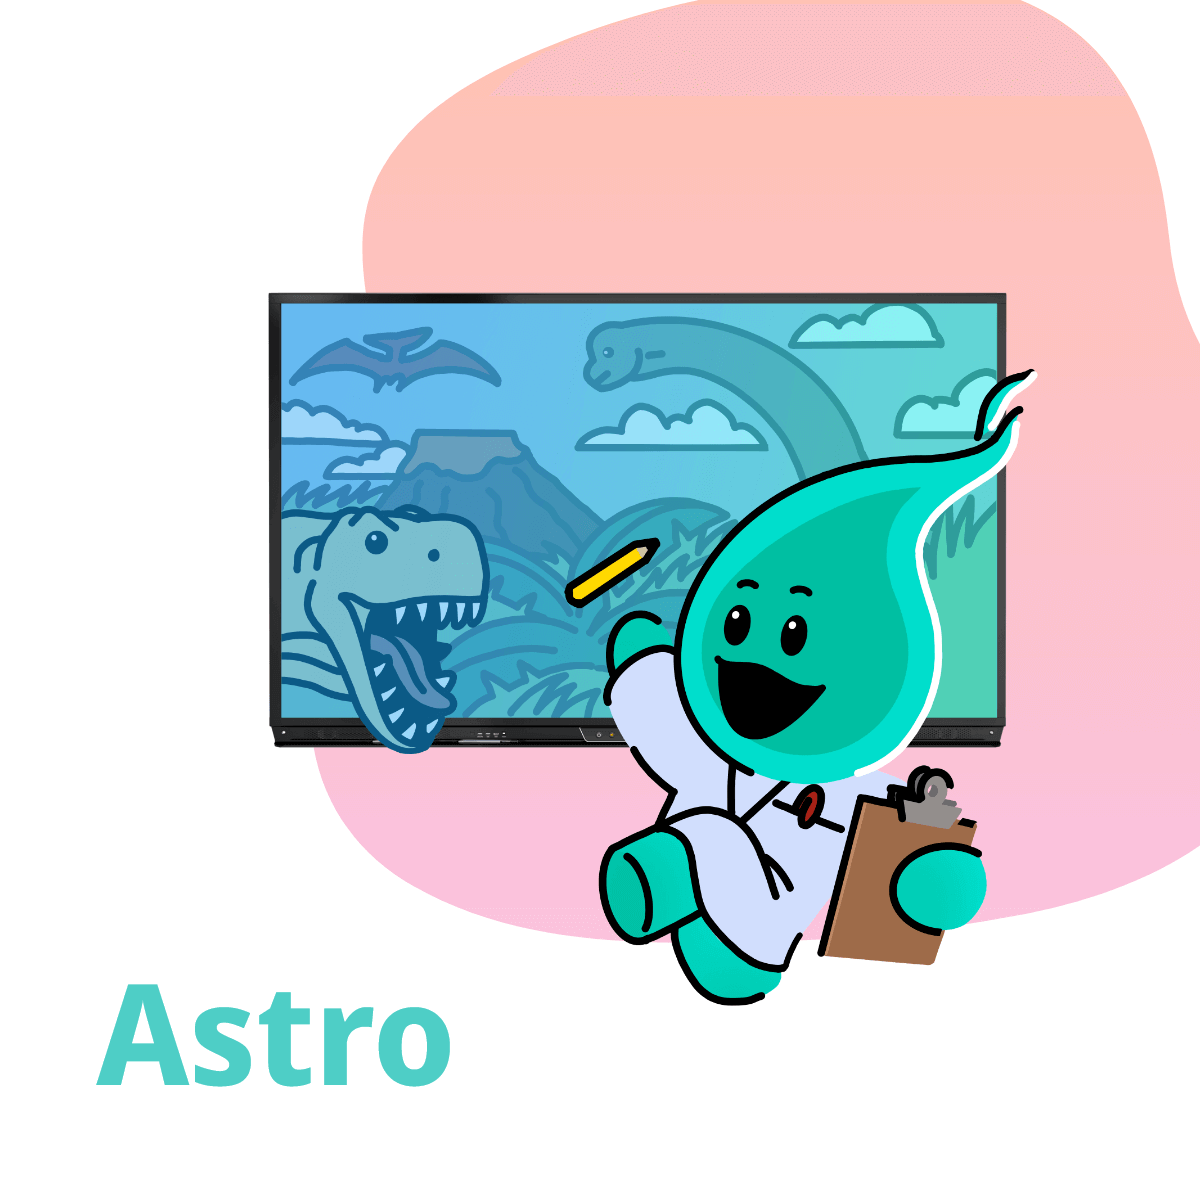 Astro character